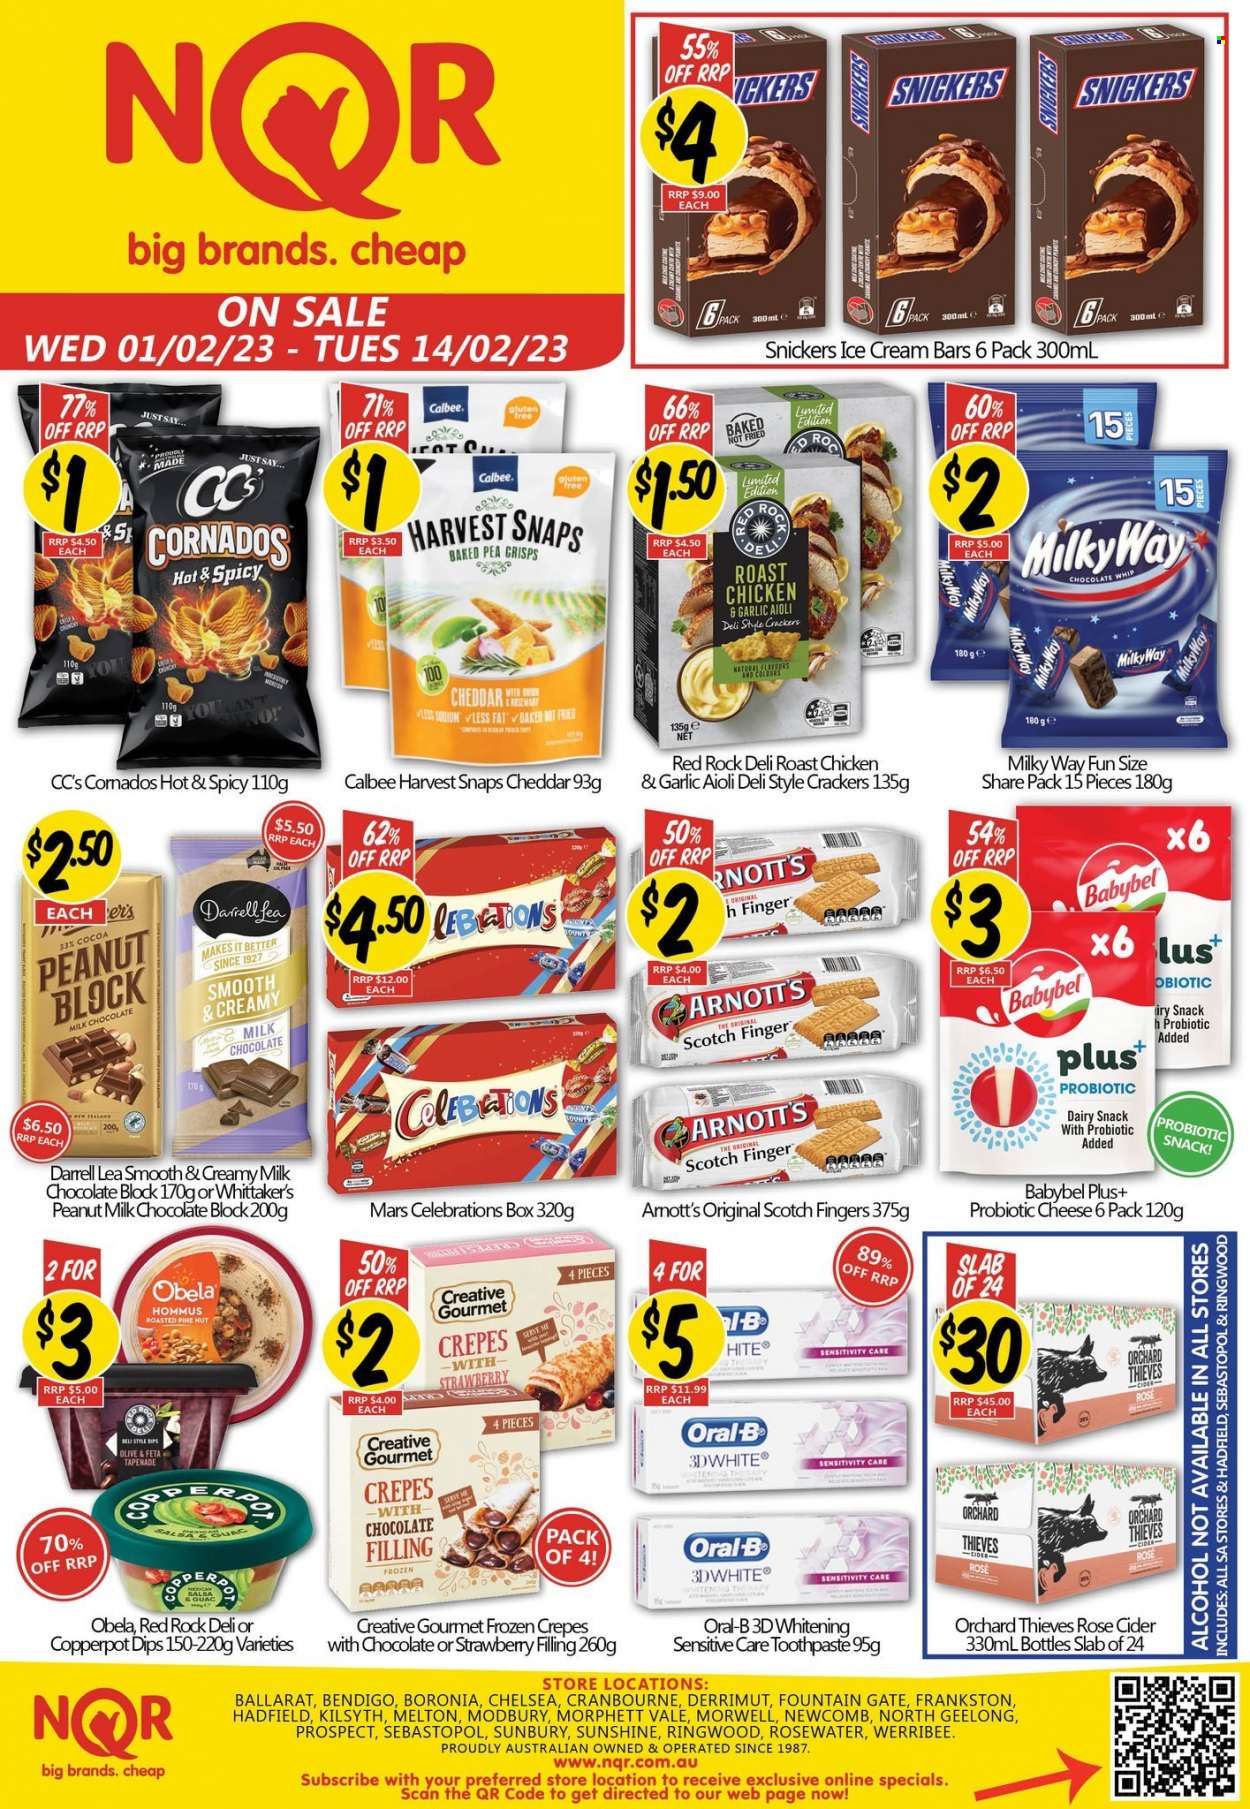 thumbnail - NQR Catalogue - 1 Feb 2023 - 14 Feb 2023 - Sales products - chicken roast, hummus, Obela, cheddar, cheese, feta, Babybel, Sunshine, ice cream, ice cream bars, frozen crepes, milk chocolate, Milky Way, Snickers, Mars, Celebration, crackers, Whittaker's, cocoa, Harvest Snaps, salsa, wine, rosé wine, cider, Oral-B, toothpaste. Page 1.